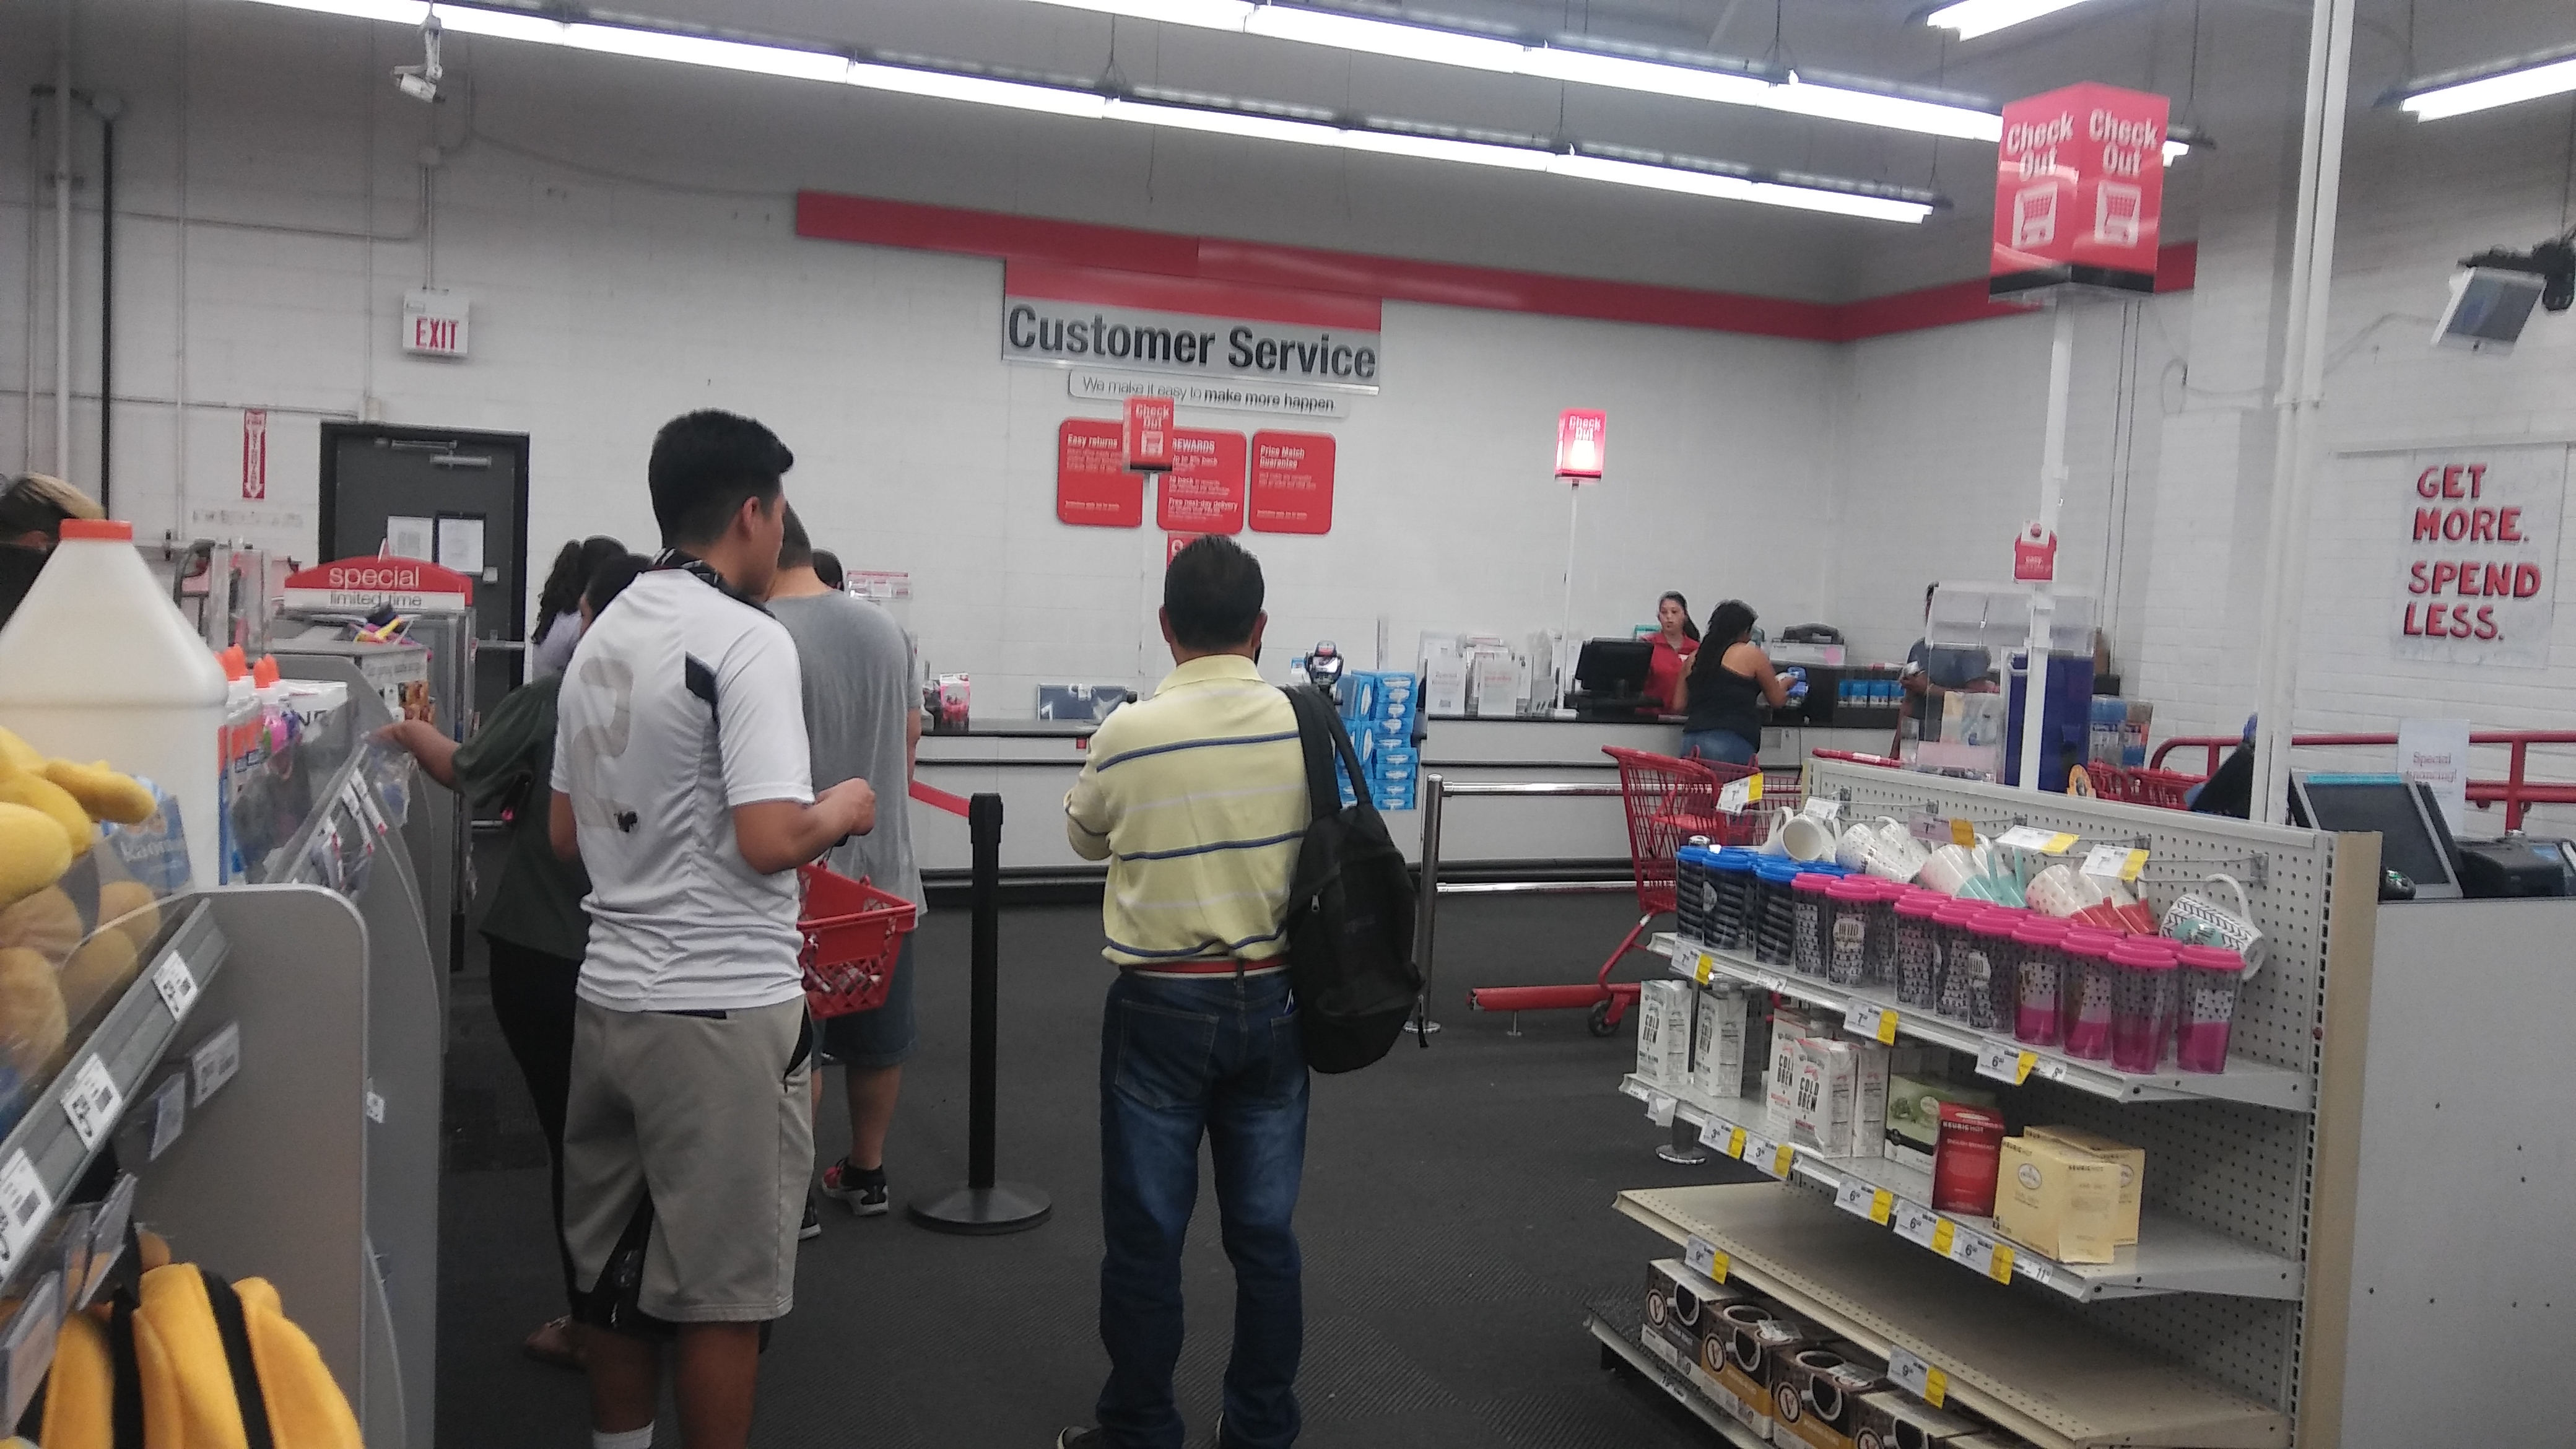 Various Pictures Of The Staples Store Showing You The Very Long Lines, The Cockroaches, Etc.

What A Disaster Of A Shopping Experience!